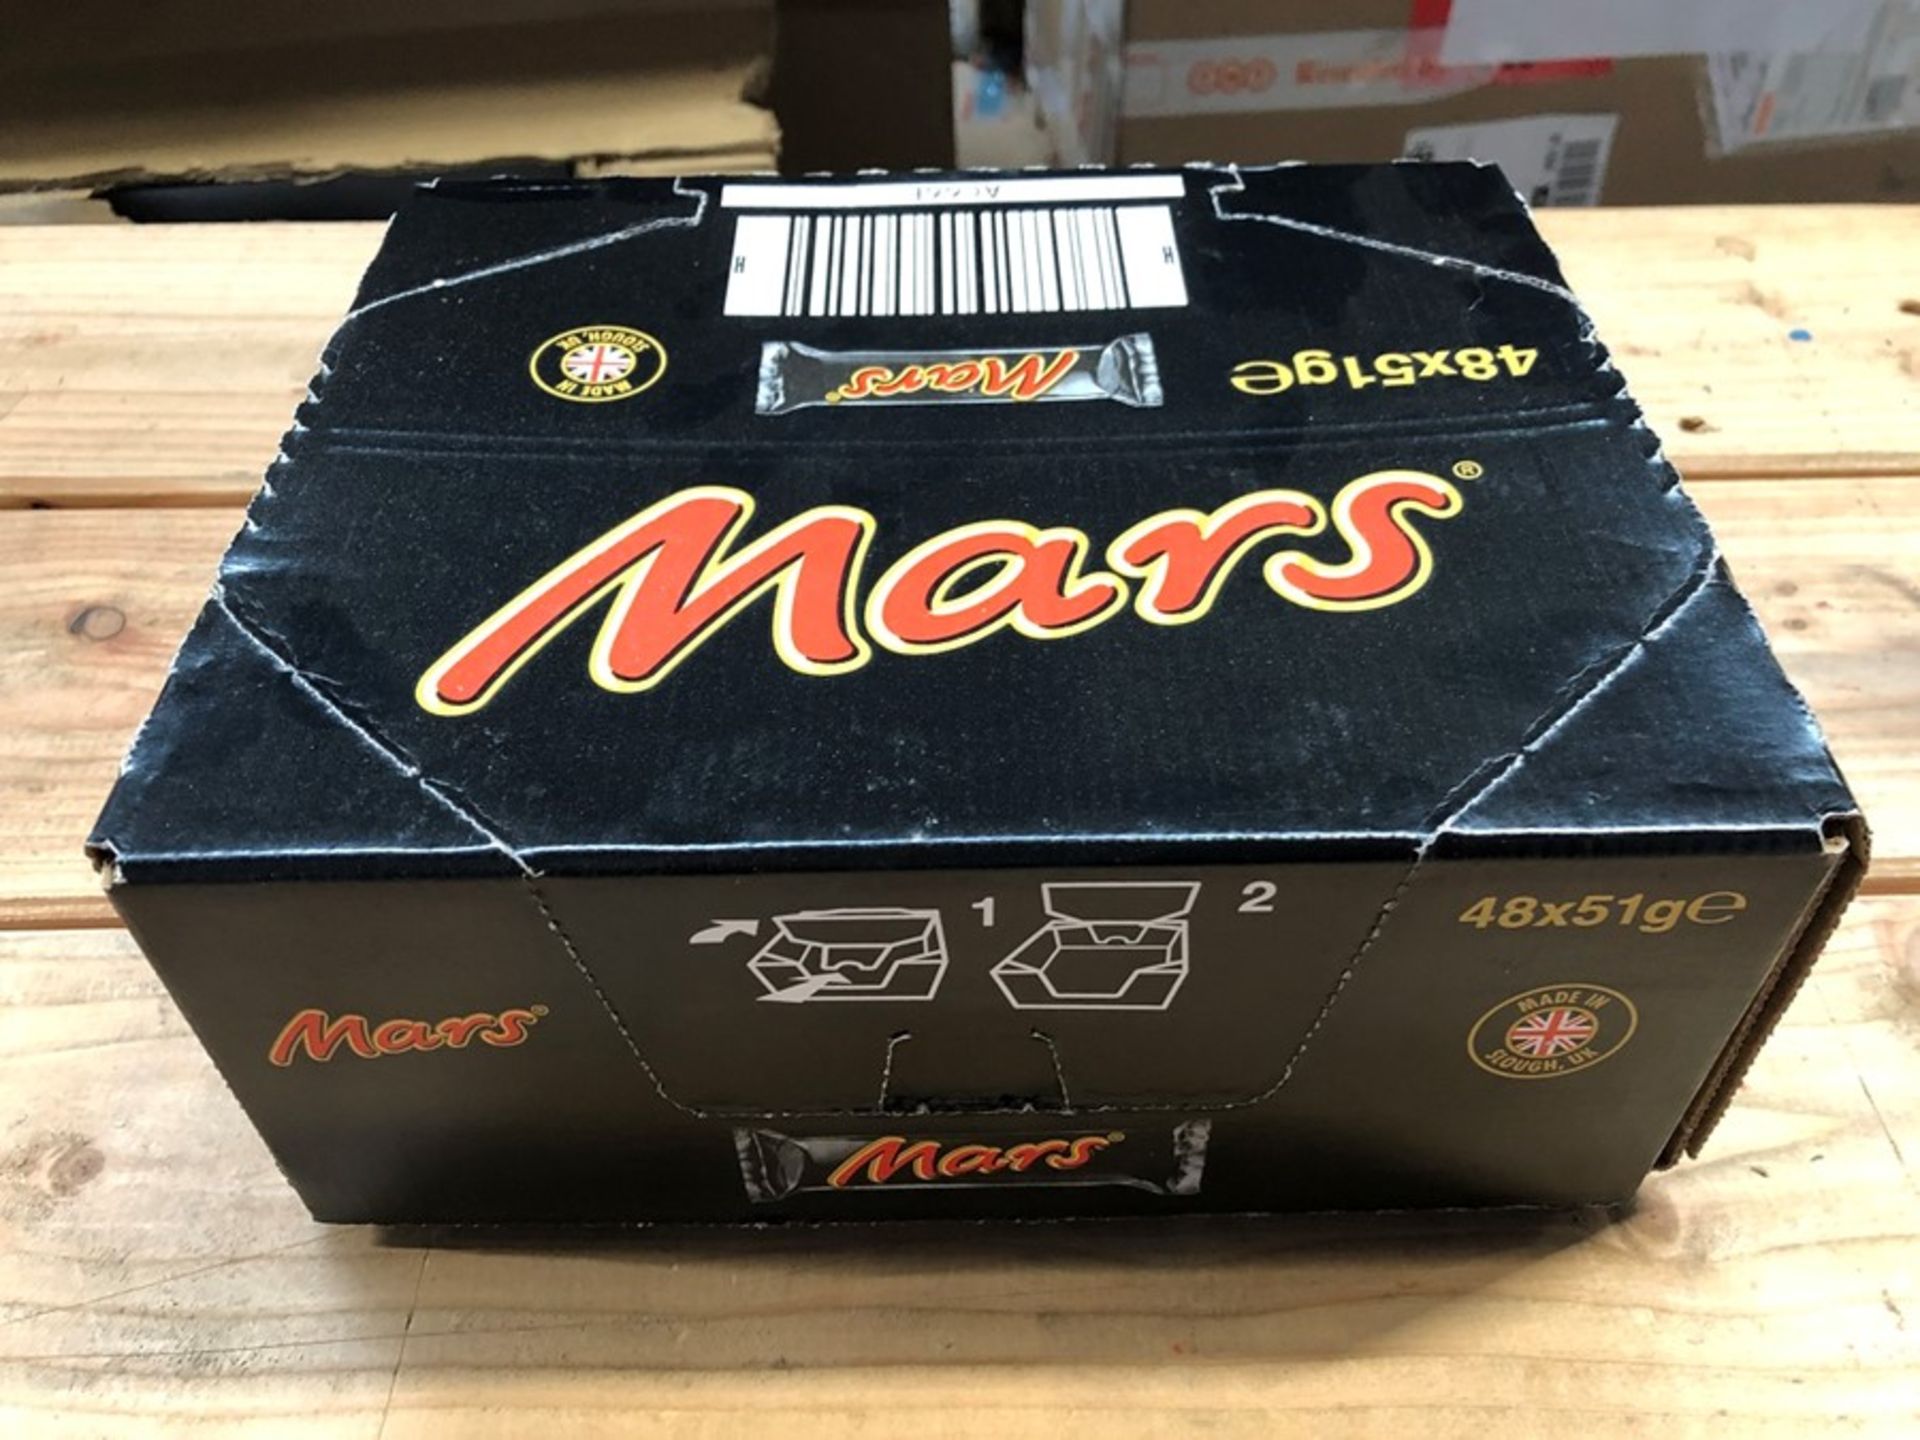 1 LOT TO CONTAIN 2 BOXES OF MARS BARS - 48 MARS BARS PER BOX / BEST BEFORE: 07-06-20